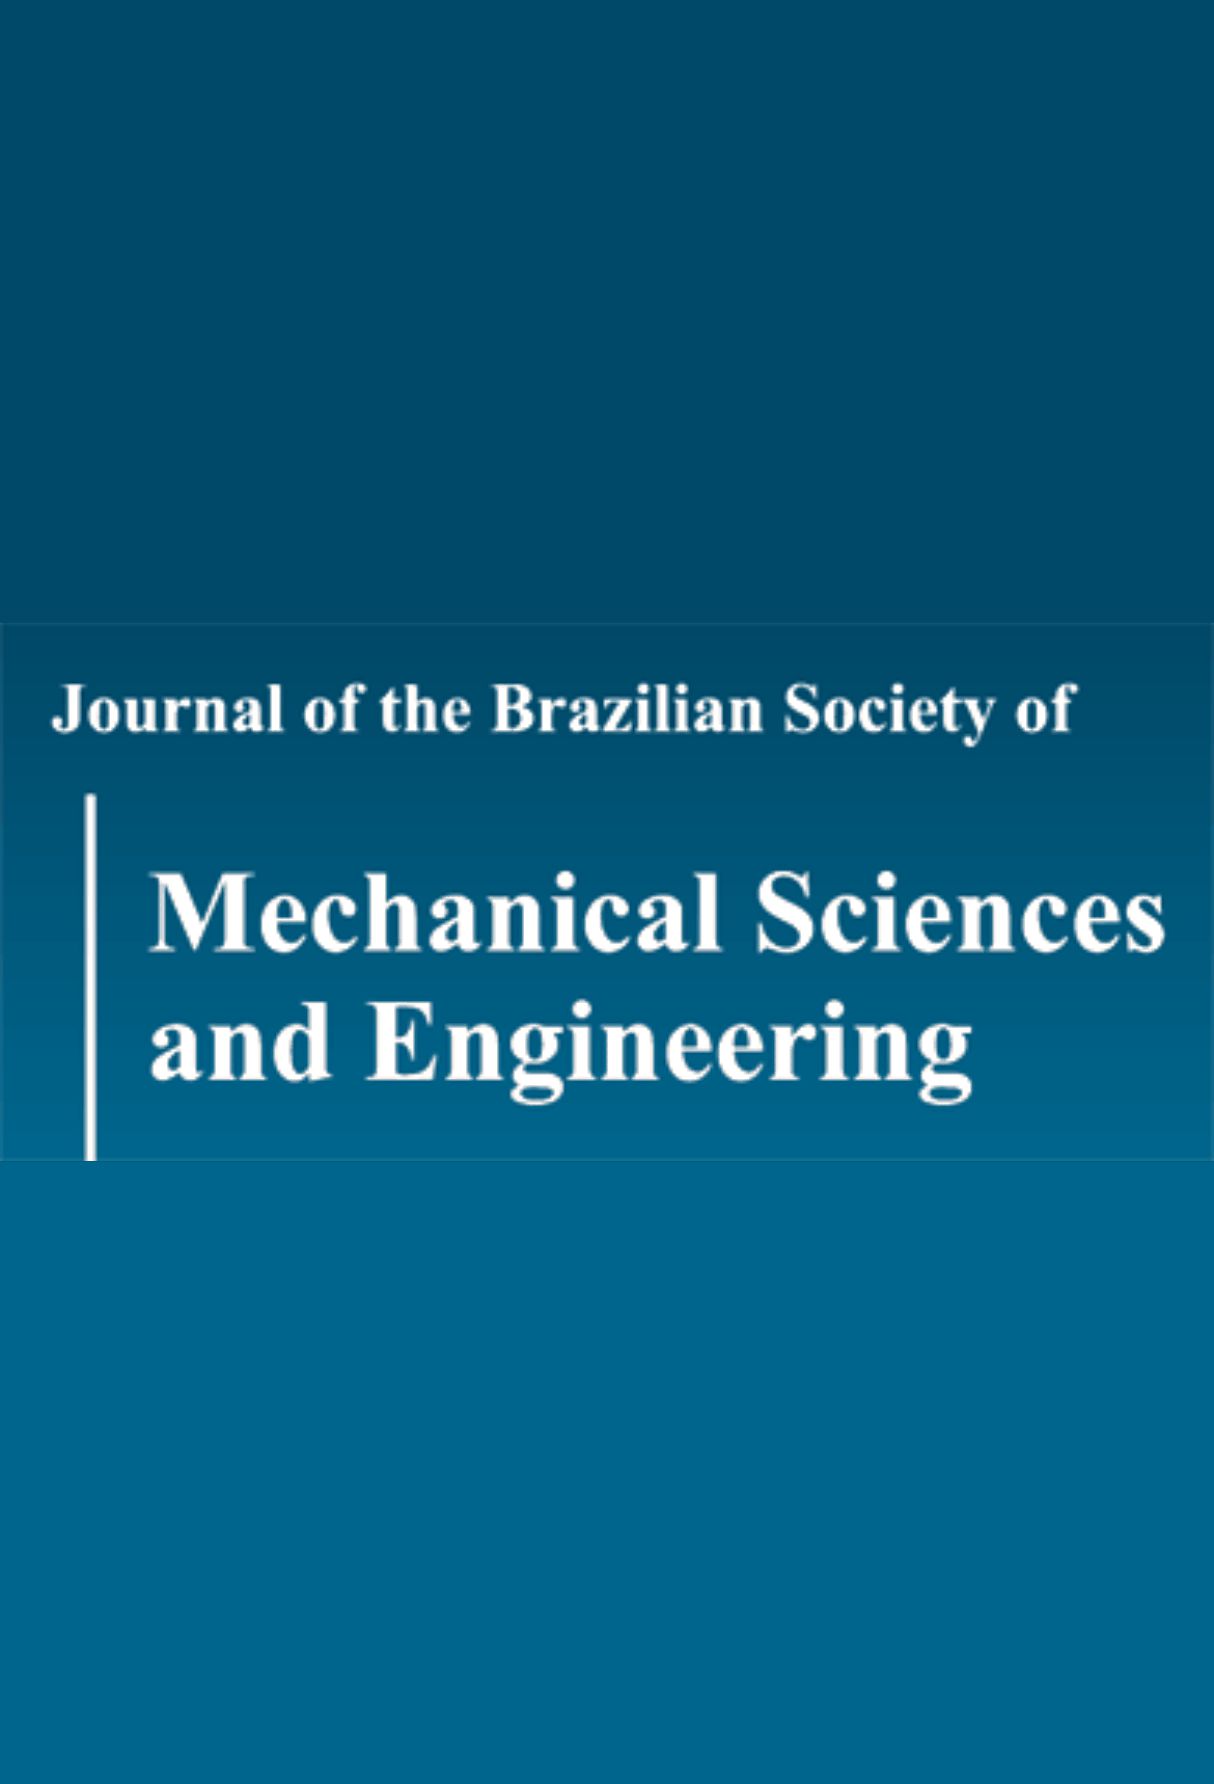 Capa: Journal of the Brazilian Society of Mechanical Sciences Engineering